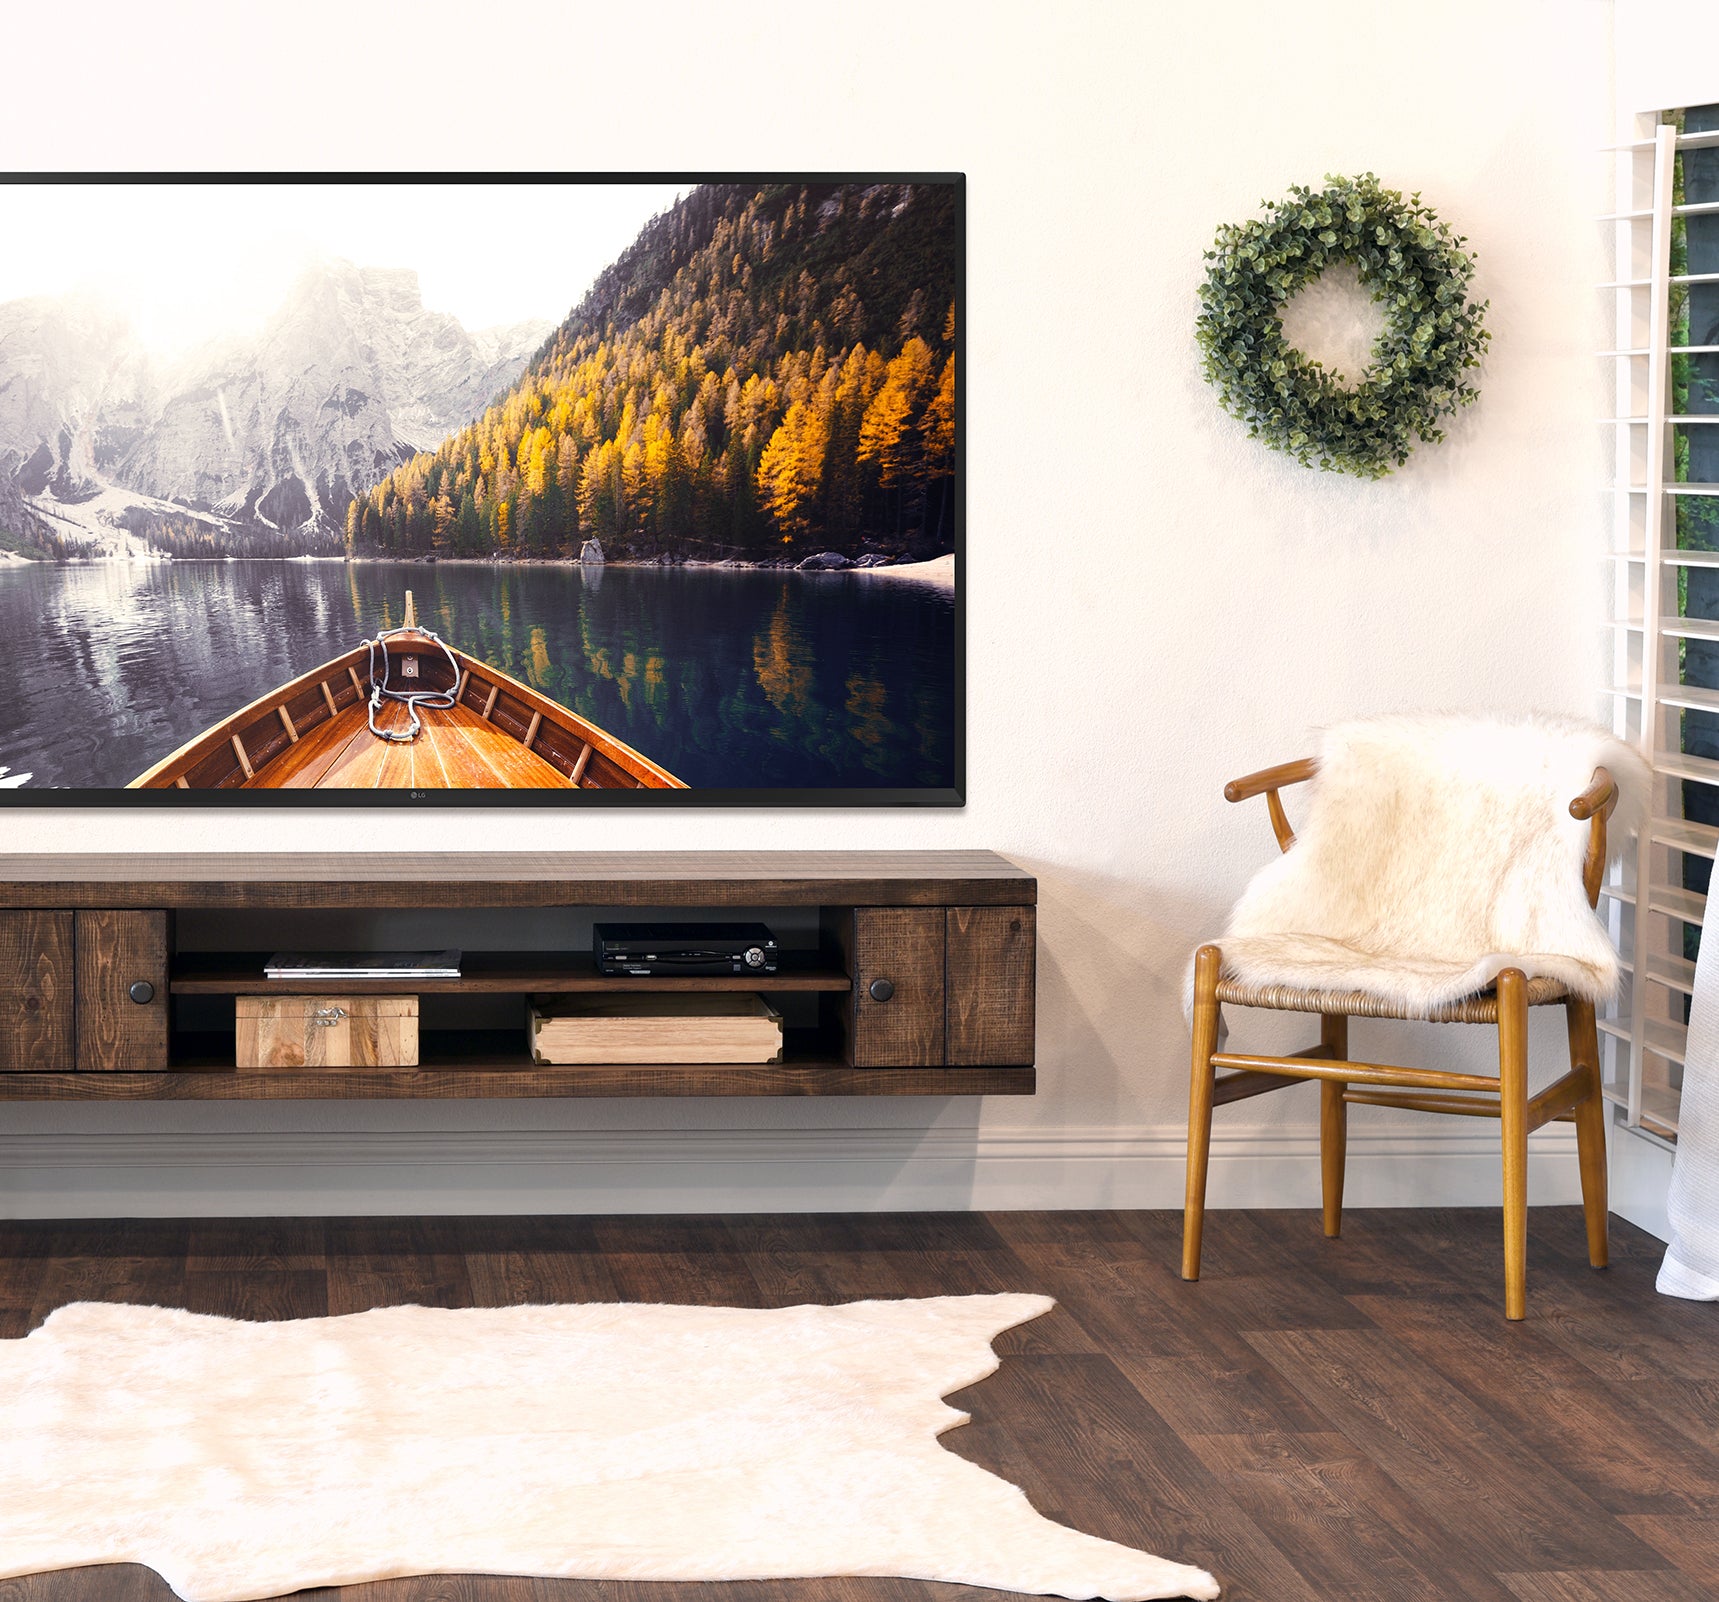 Floating TV Stand - Woodwaves - Rustic Wood Floating Entertainment Center Console - Farmhouse Collection - Spice